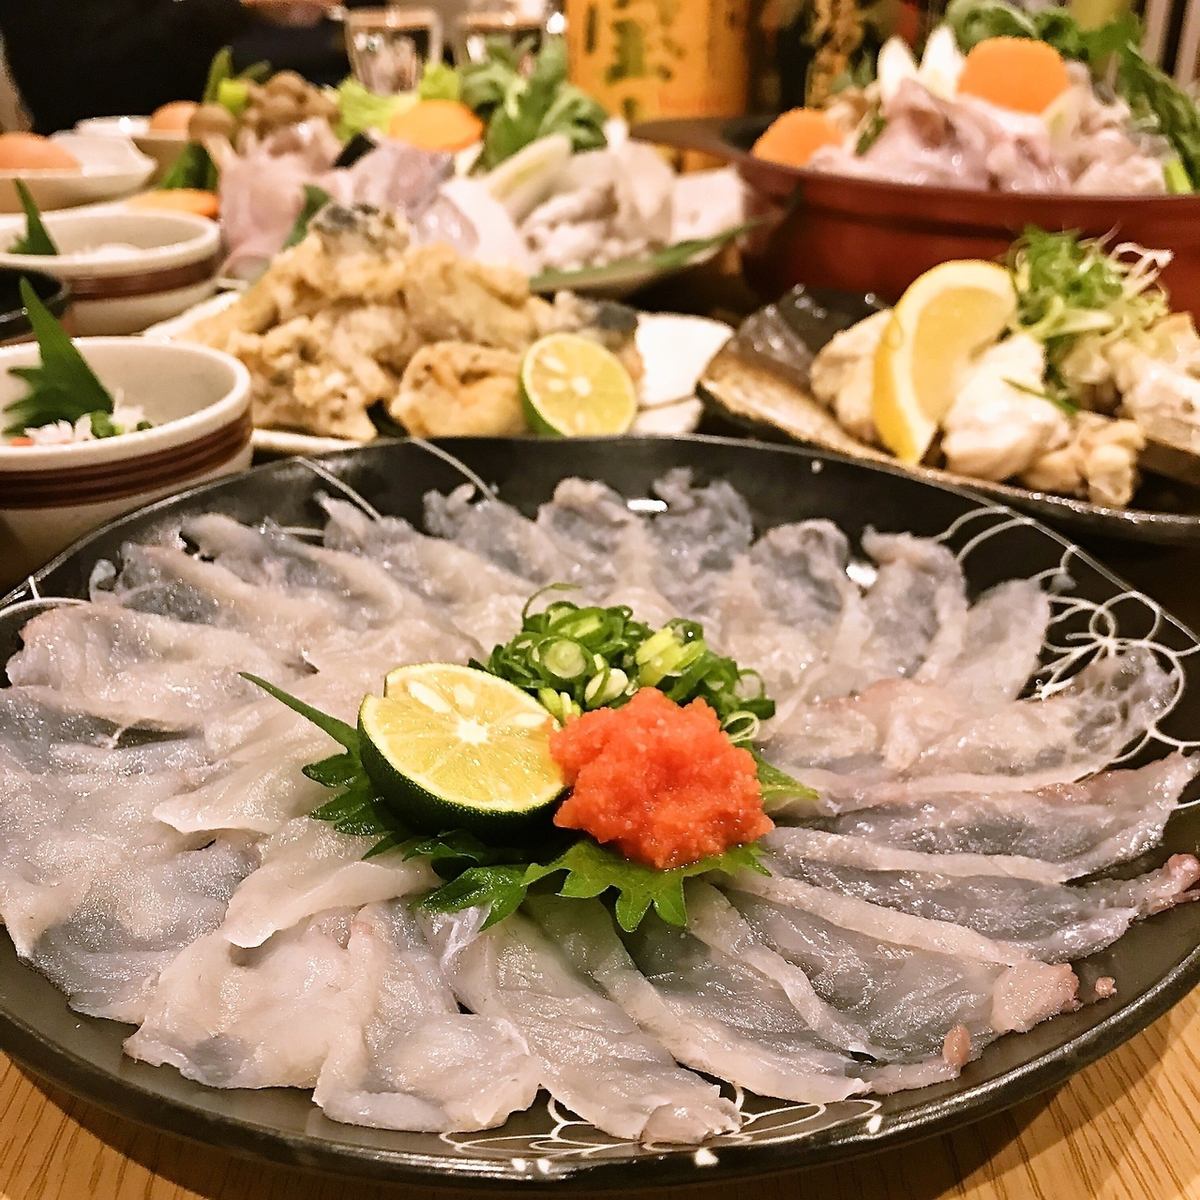 Enjoy authentic dishes at an affordable price 【Seafood Sakaba】